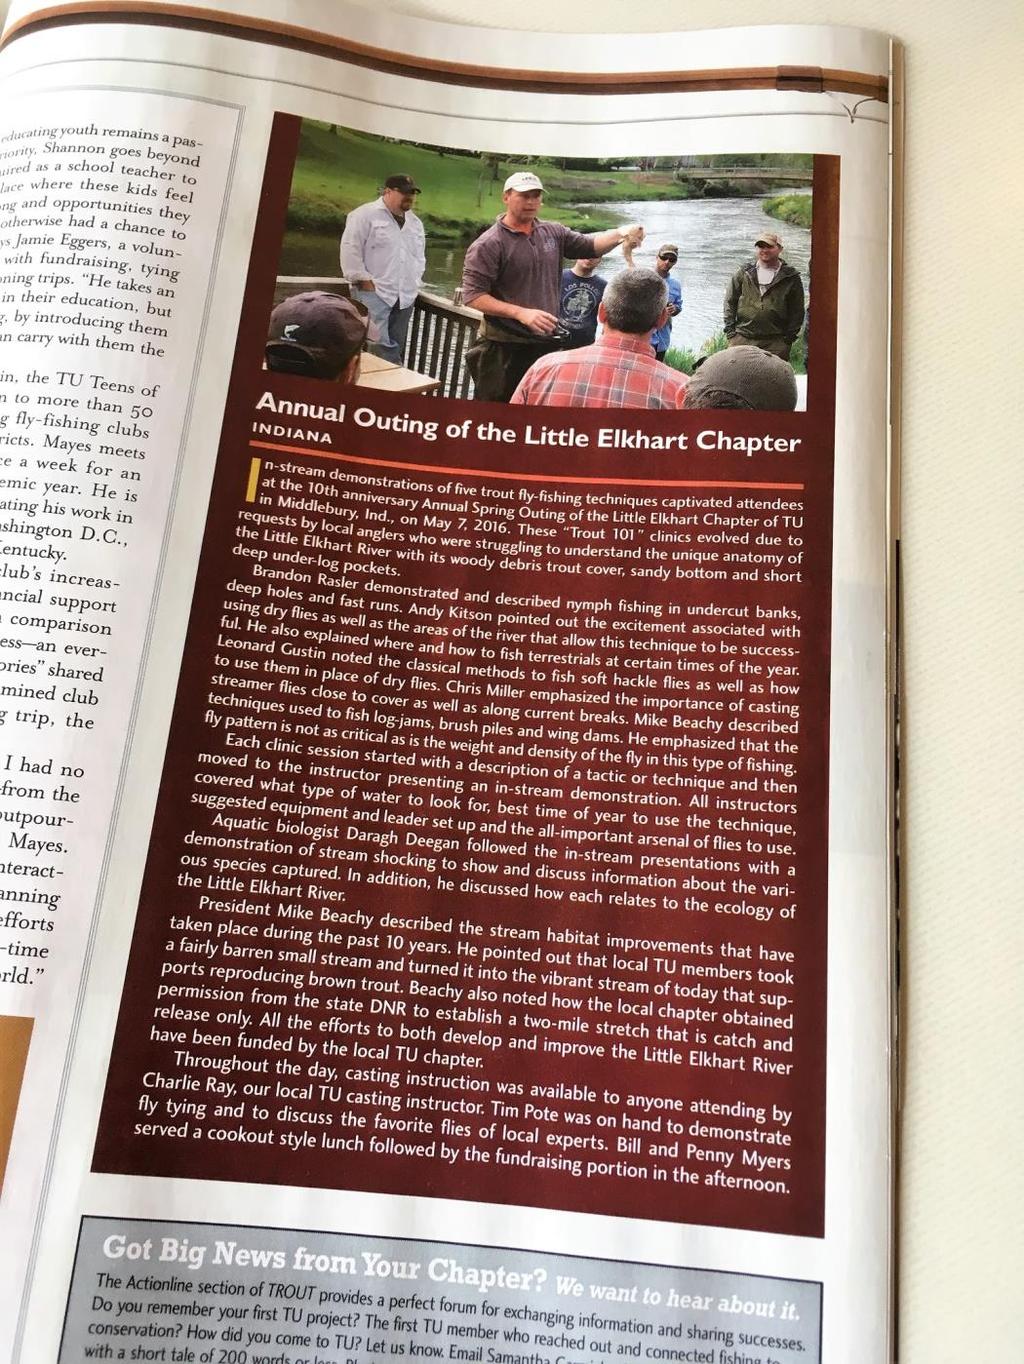 LECTU Recognized in TROUT The Little Elkhart Chapter was recognized by TU National this month in the Spring 2017 edition of the TU magazine TROUT.